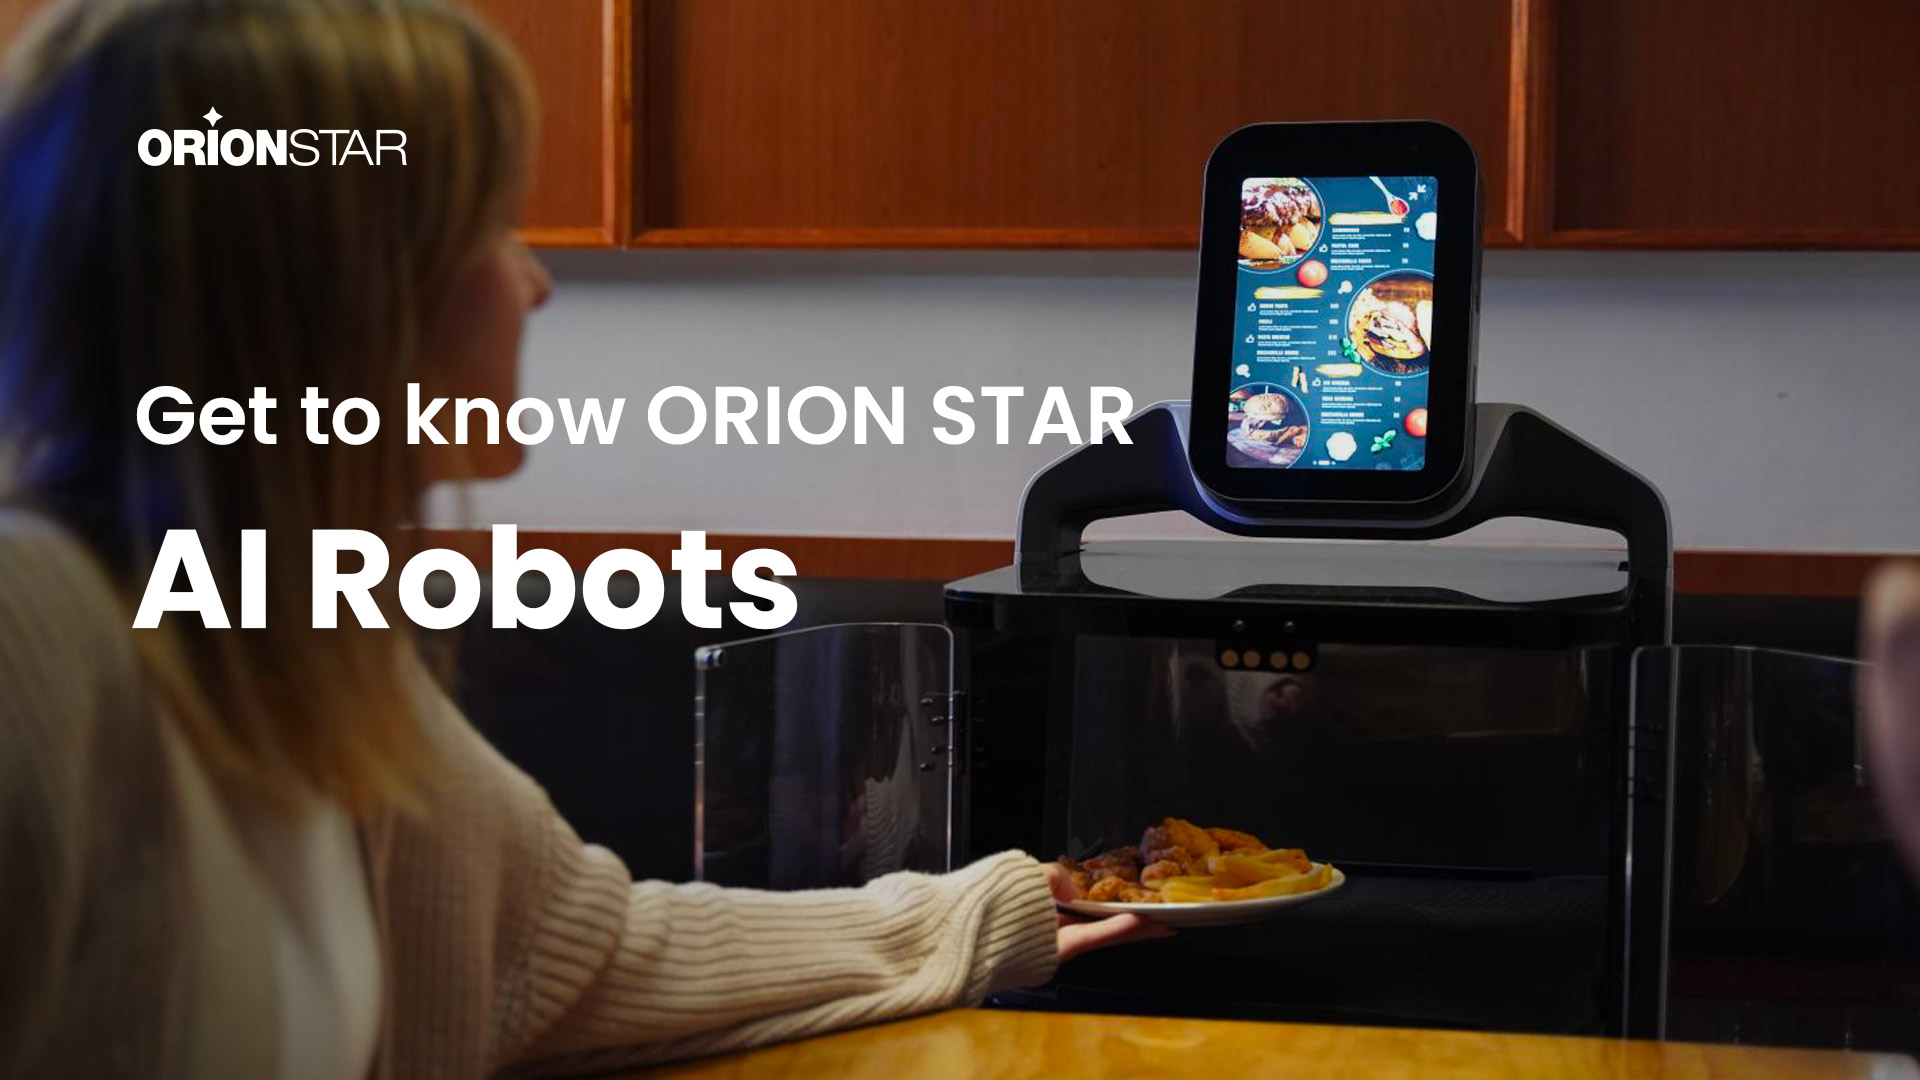 How do I know ORION STAR Restaurant Service Robot is Trustworthy?